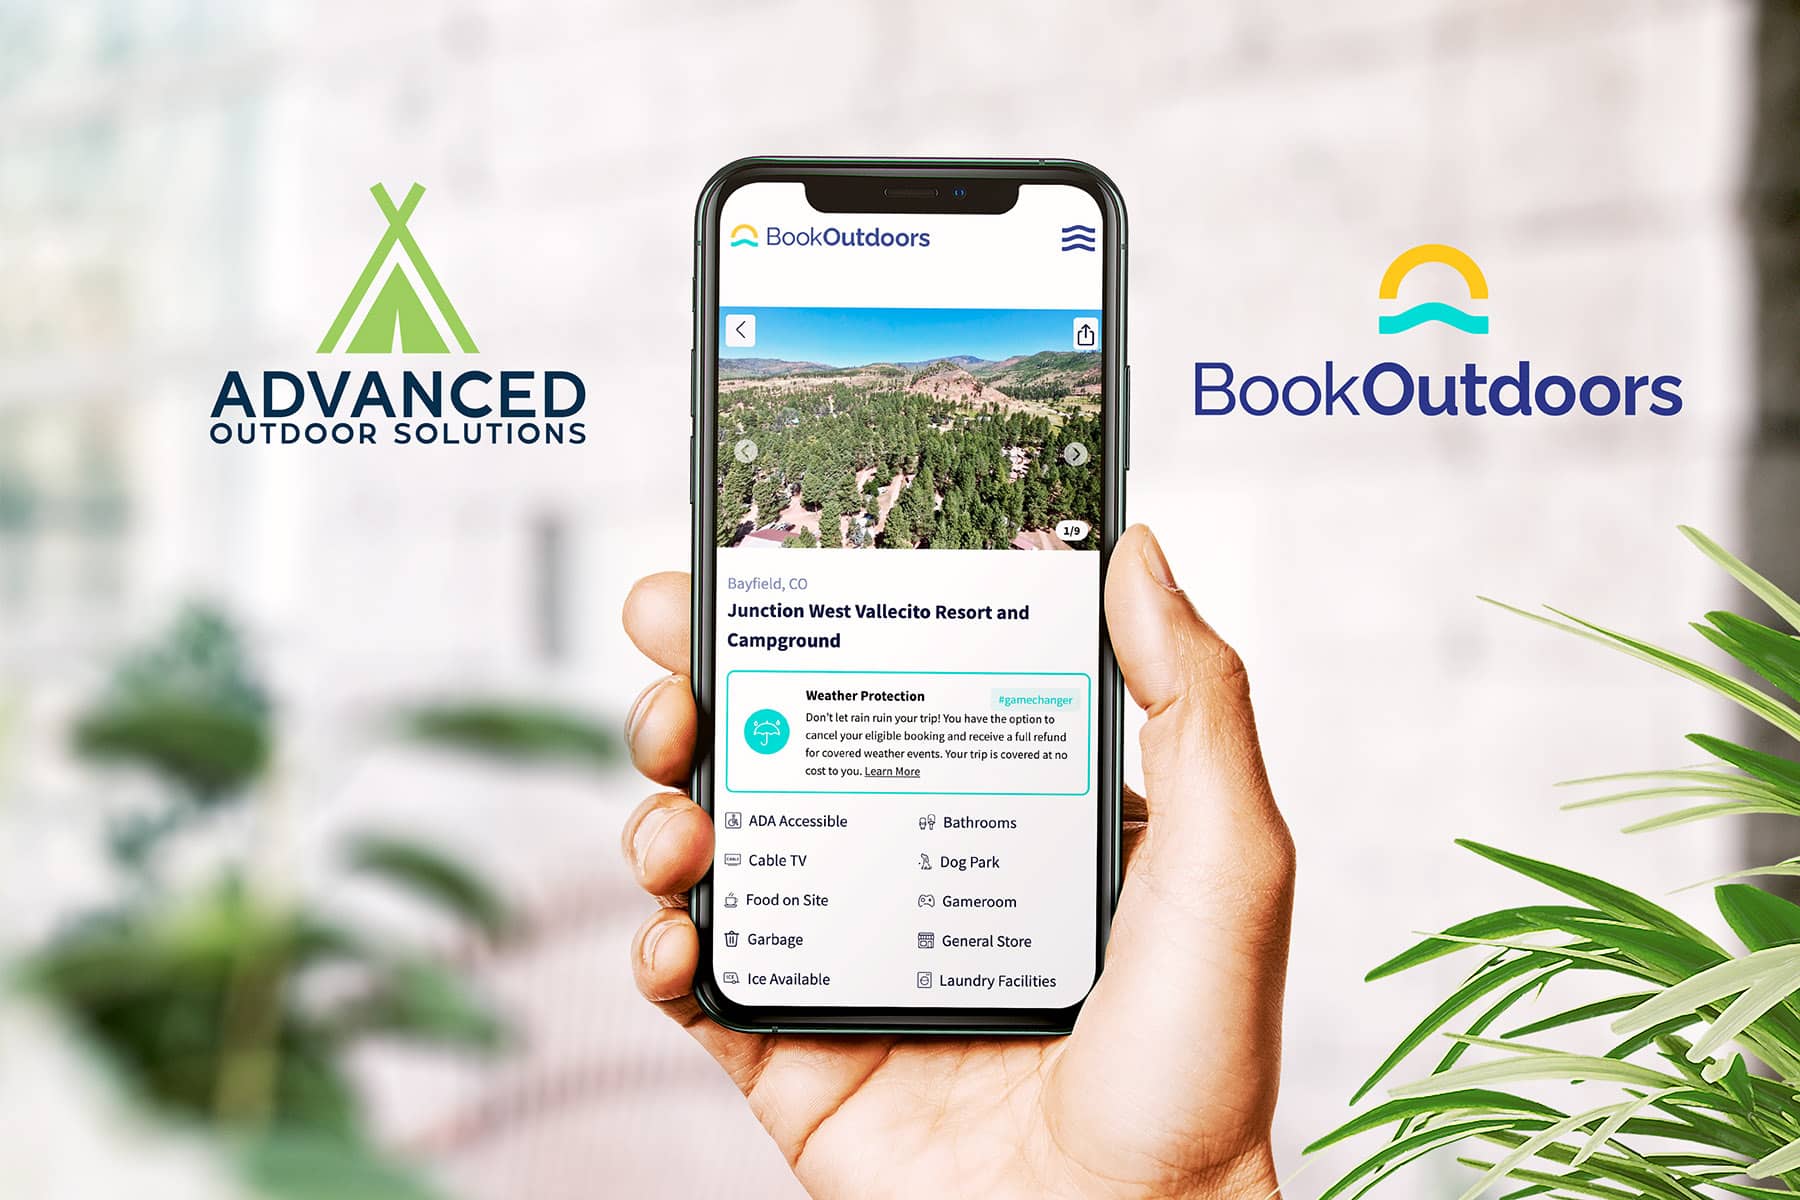 BookOutdoors Collaborates with Advanced Outdoor Solutions